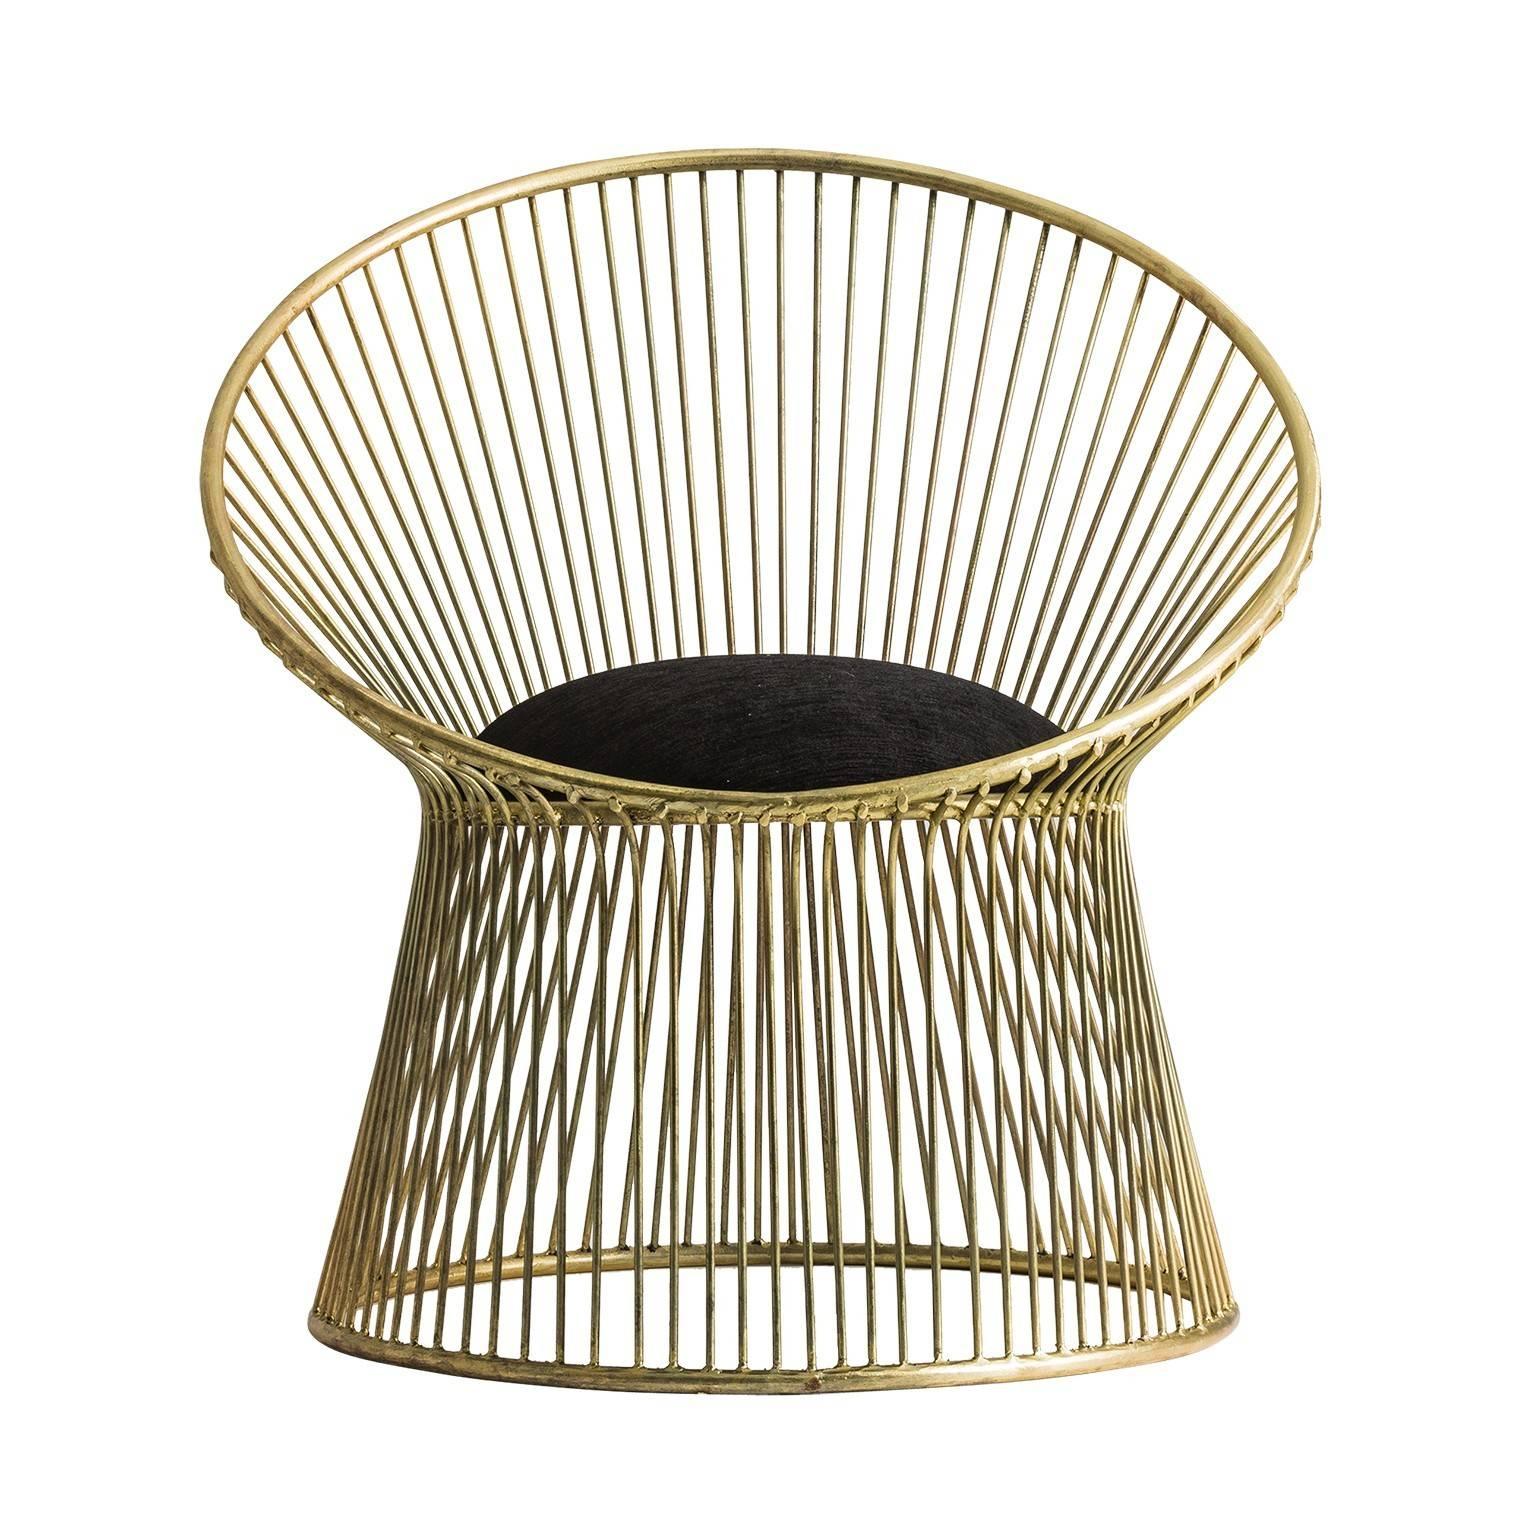 Graphic and contemporary spirit for this armchair in steel wires. An aerial aspect for a solid foundation